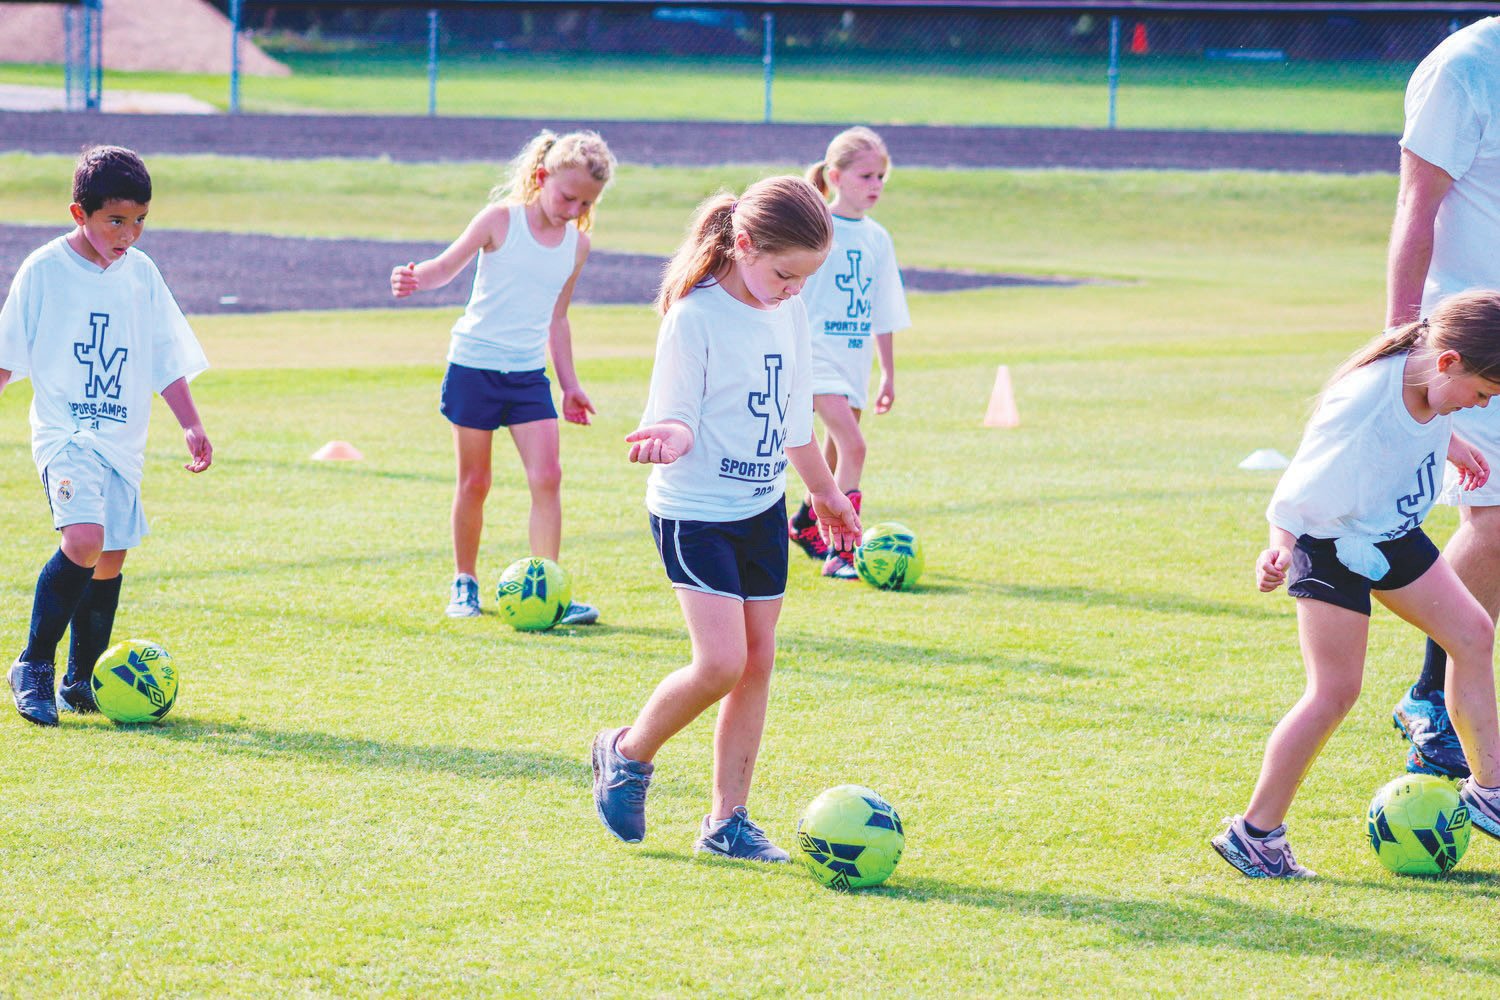 A small group of campers (from left to right: Liam Rodriguez Hutarte, June Carol Perry, Carissa Reece, Piper Cook, Ava Moore) — decked out in their camp t-shirts — practice dribbling drills on the final day of J-M's youth summer soccer camp on July 1, 2021.